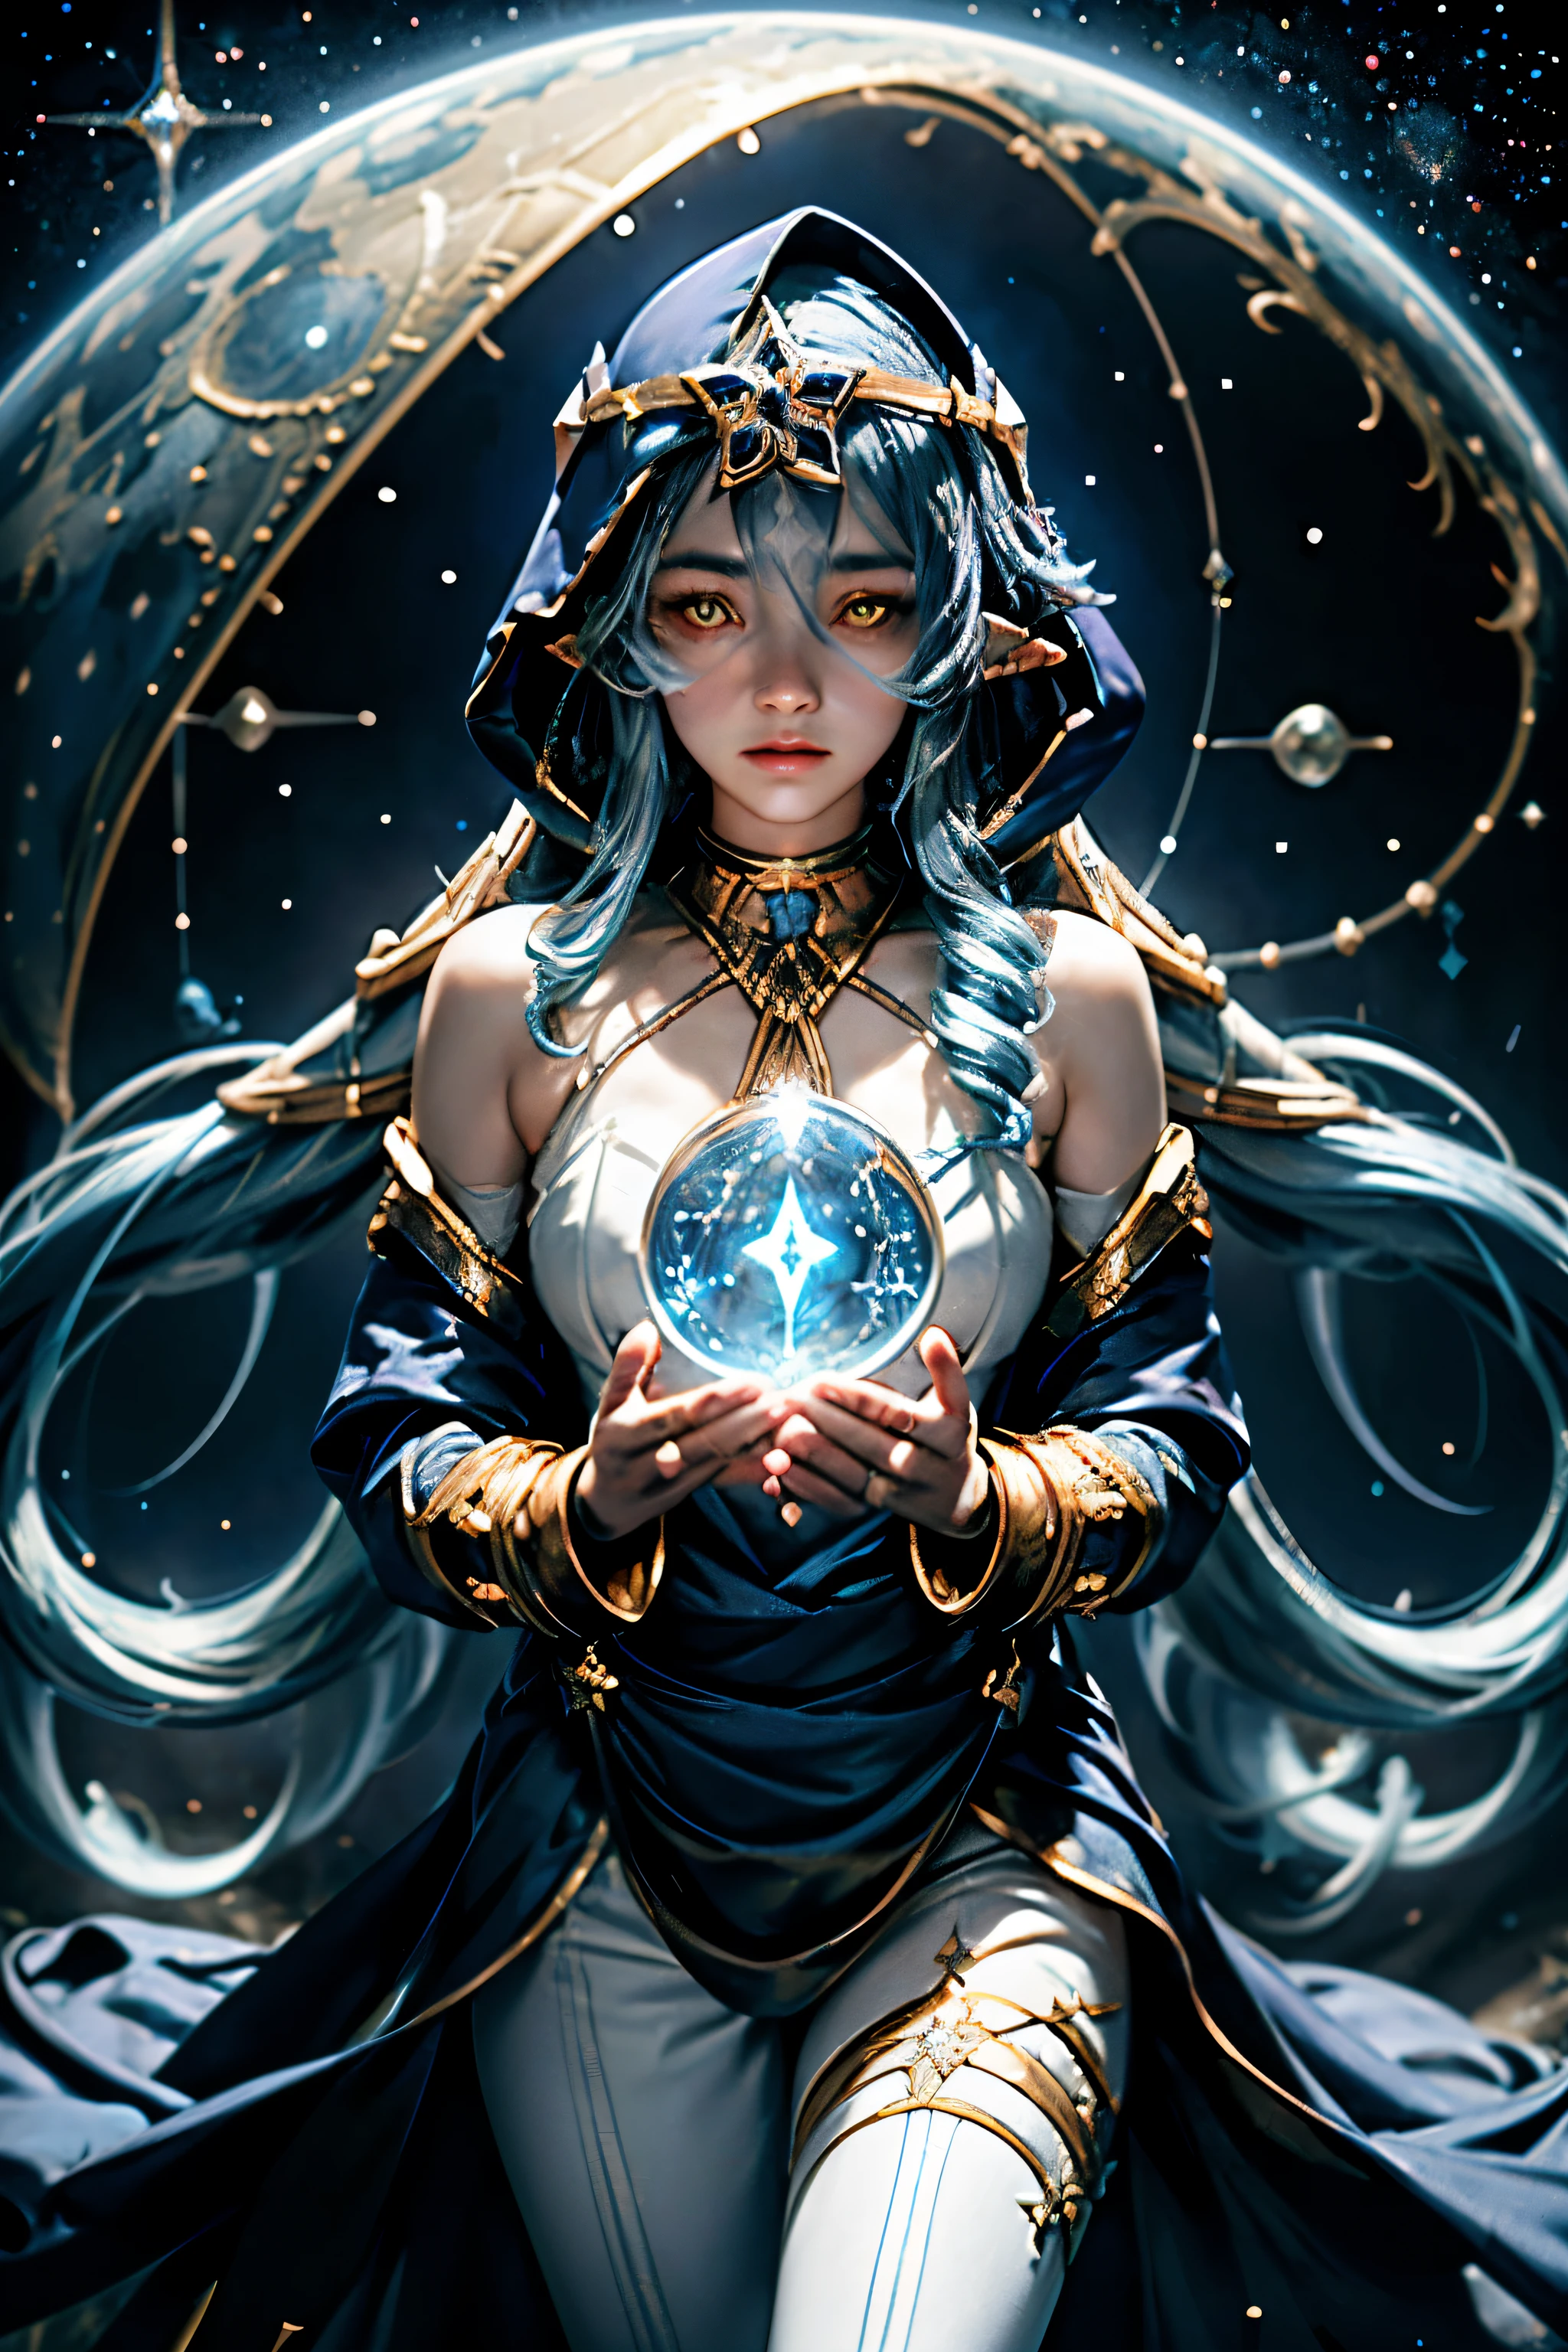 (1 solo girl, Long wavy blue hair, Yellow eyes, Blue and white clothes, White leggings, Blue hood, Gold details and accessories, Bare shoulders) ((Close-up of the photo, Floating in space)) (Masterpiece), (Best quality:1.4), Absurdities, [:Complex details:0.2], 1girl, Flowing robes, Complex magic circuits, A glowing map of stars, constellations and galaxies, Shimmering halo, Intense focus, Arcane spells, Energy crackles, Lifting antiques, Flickering candles, Swirling fog, Sparkling stars, Mystical crystals, Glowing sigils, Other worldly chants, Mysterious symbols, Strong call, Transcendent consciousness, Cinematic light, cinematic shot, Dramatic shot, Aesthetic movie poster